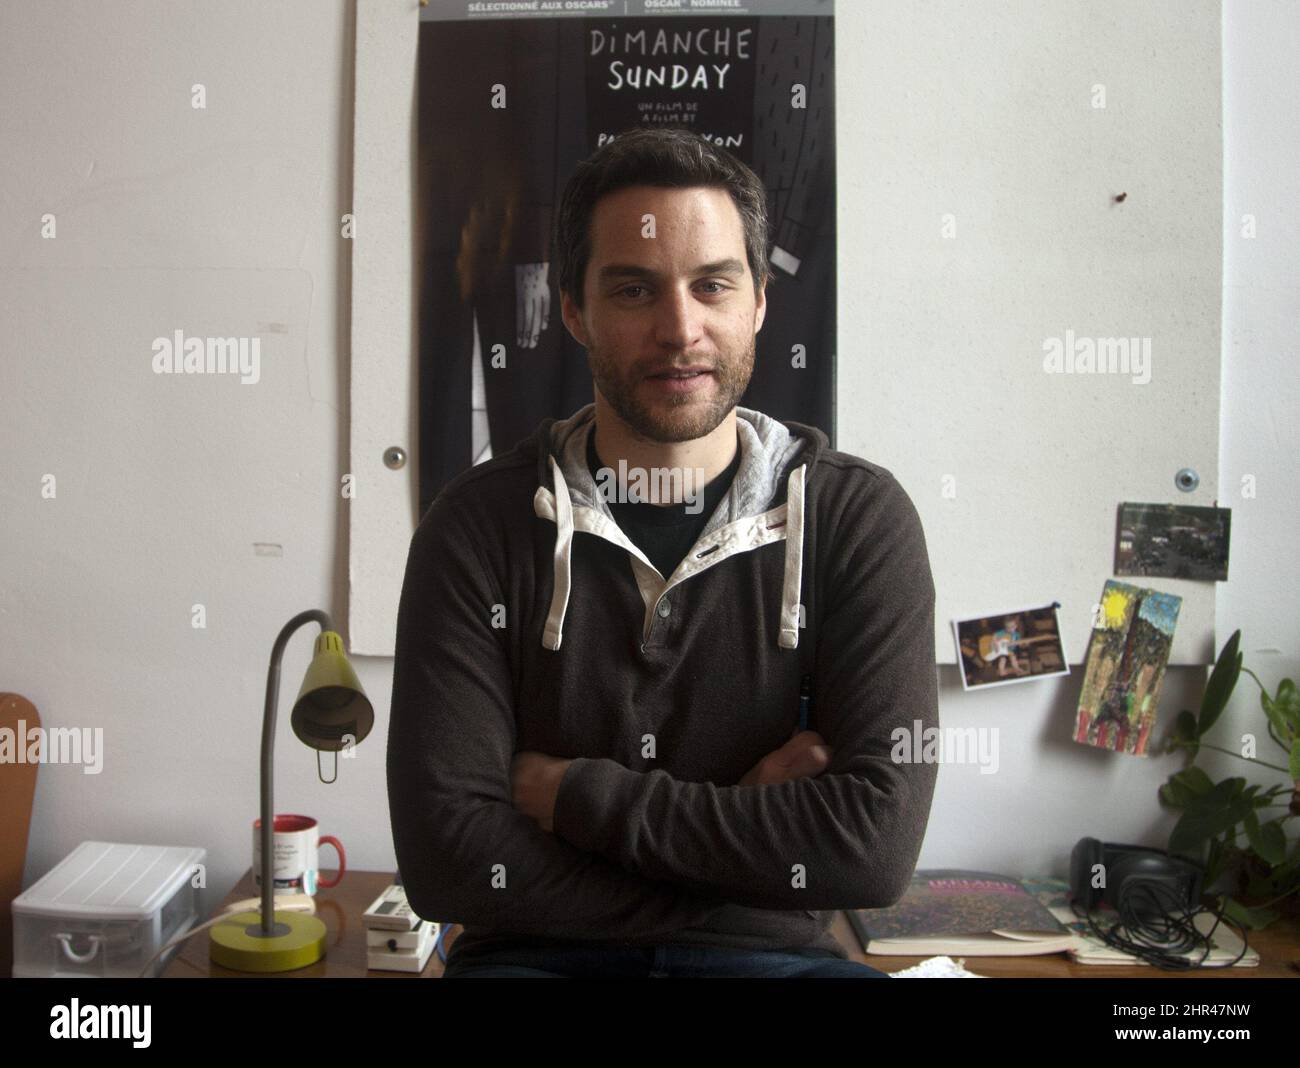 Filmmaker Patrick Doyon poses for a photo in his studio Friday, Feb. 10, 2012 in Montreal. Doyon's animated short film 'Sunday/Dimanche,' is nominated for an Academy Award. (AP Photo/The Canadian Press, Ryan Remiorz) Stock Photo